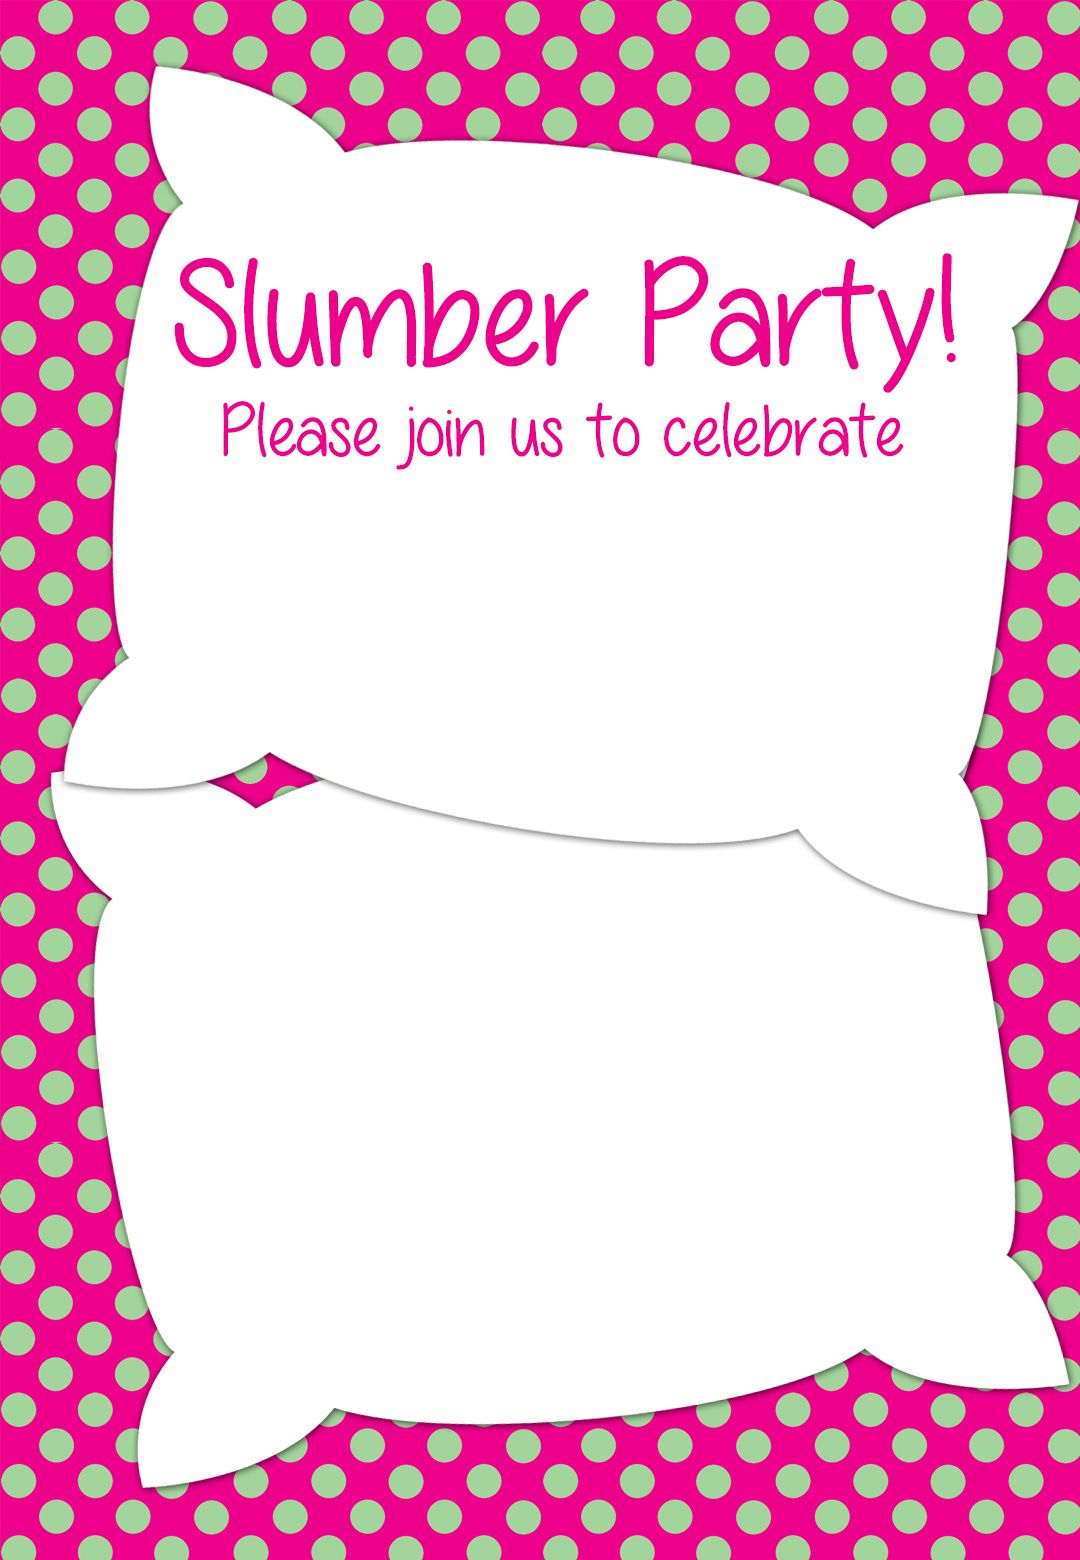 Free Printable Slumber Party Invitation Party Ideas In 2019 inside dimensions 1080 X 1560